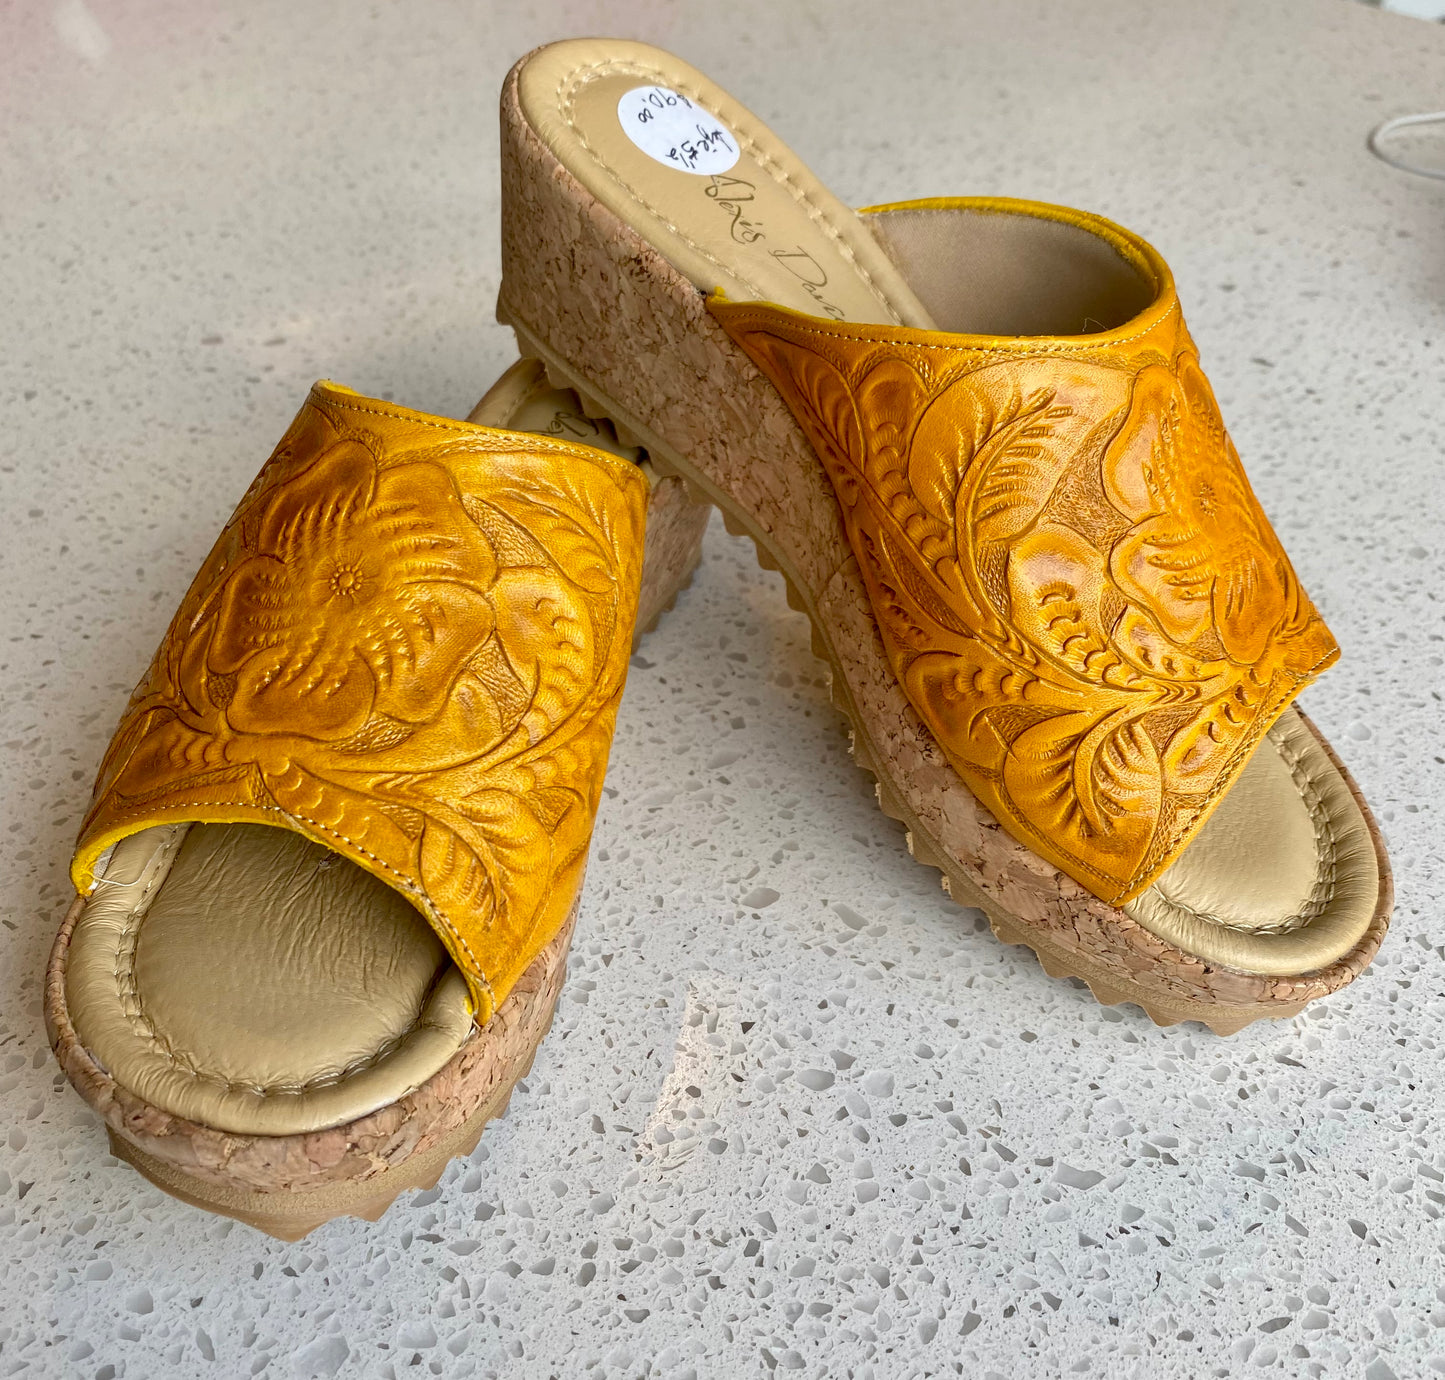 Hand-Tooled Leather 2” Cork Low Heel Heels Hide and Chic Yellow  